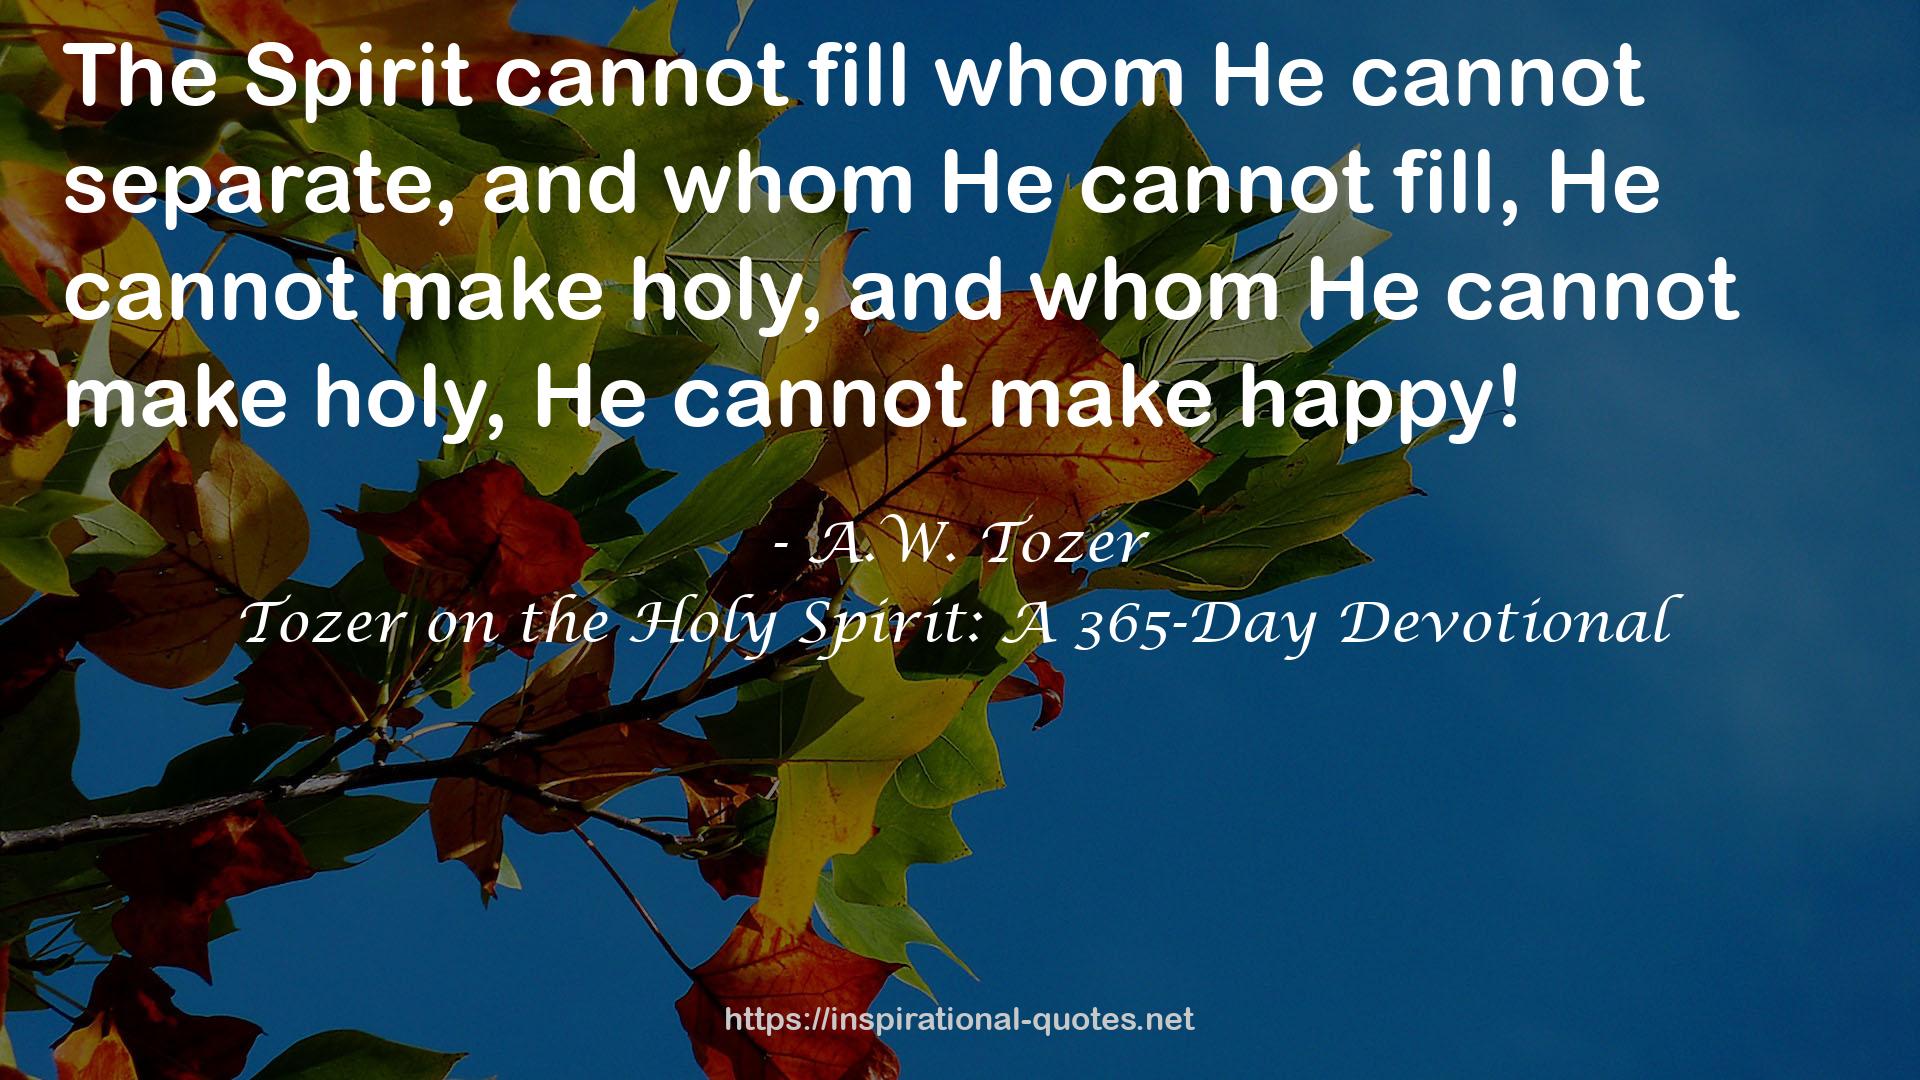 Tozer on the Holy Spirit: A 365-Day Devotional QUOTES